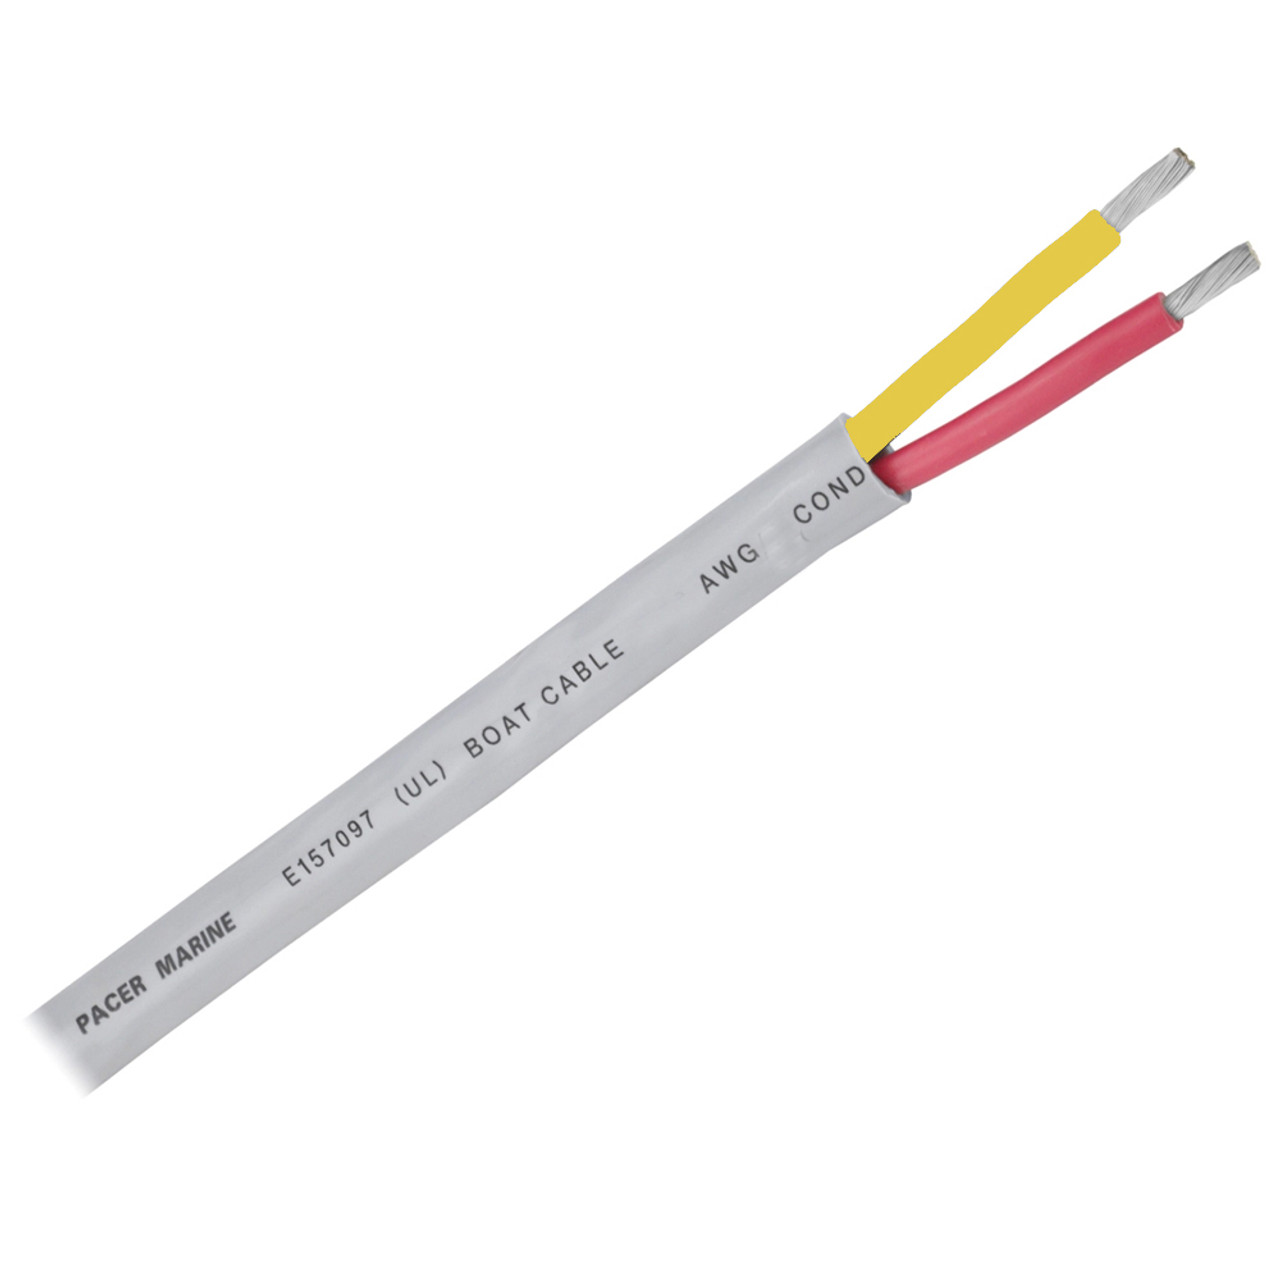 Pacer 16\/2 AWG Round Safety Duplex Cable - Red\/Yellow - 100 [WR16\/2RYW-100]